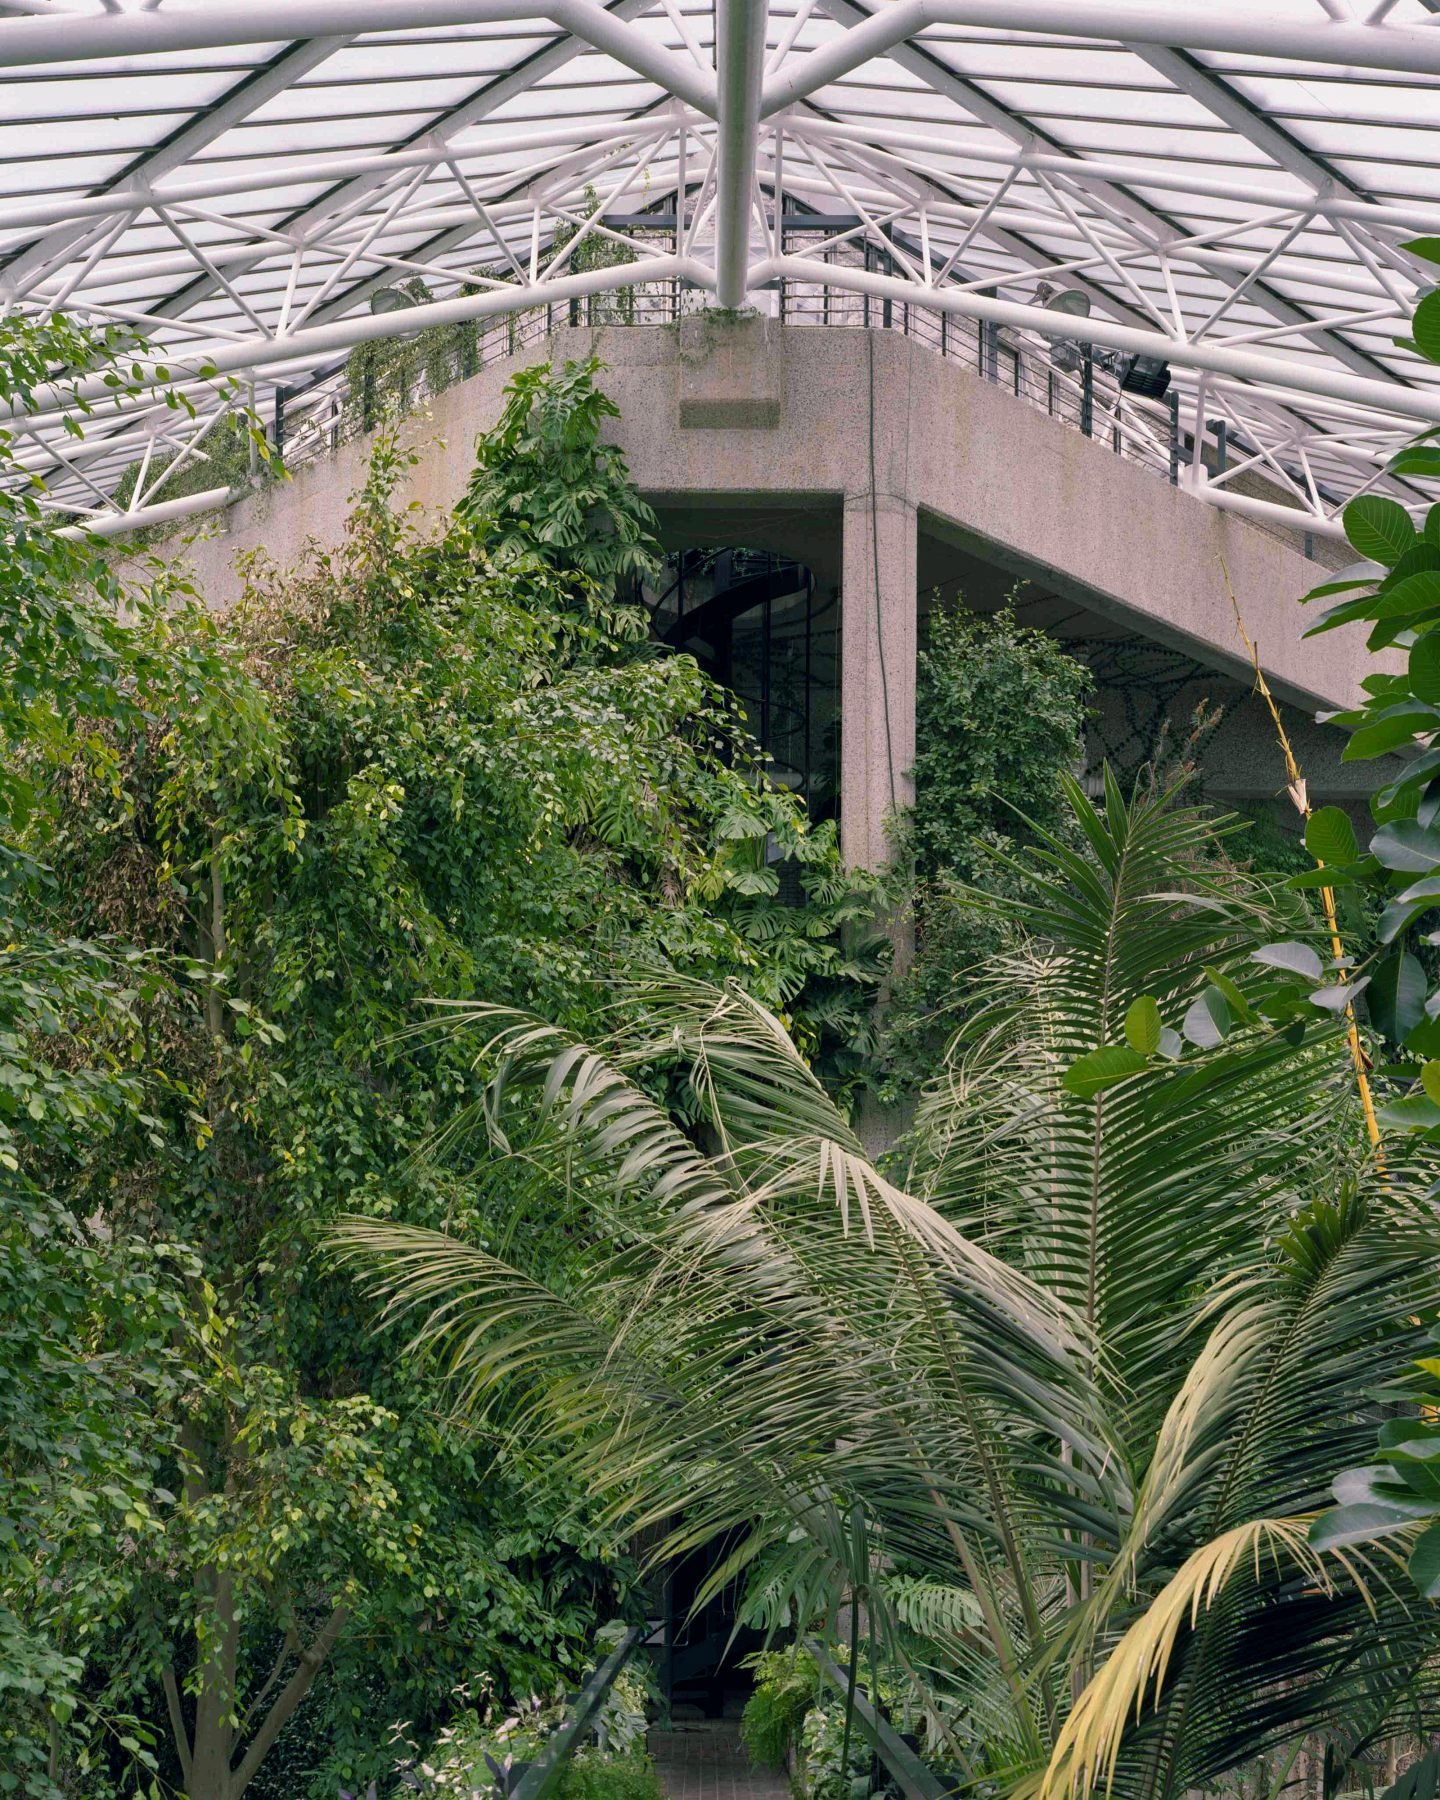 IGNANT-Travel-Luke-Hayes-The-Barbican-Conservatory-01